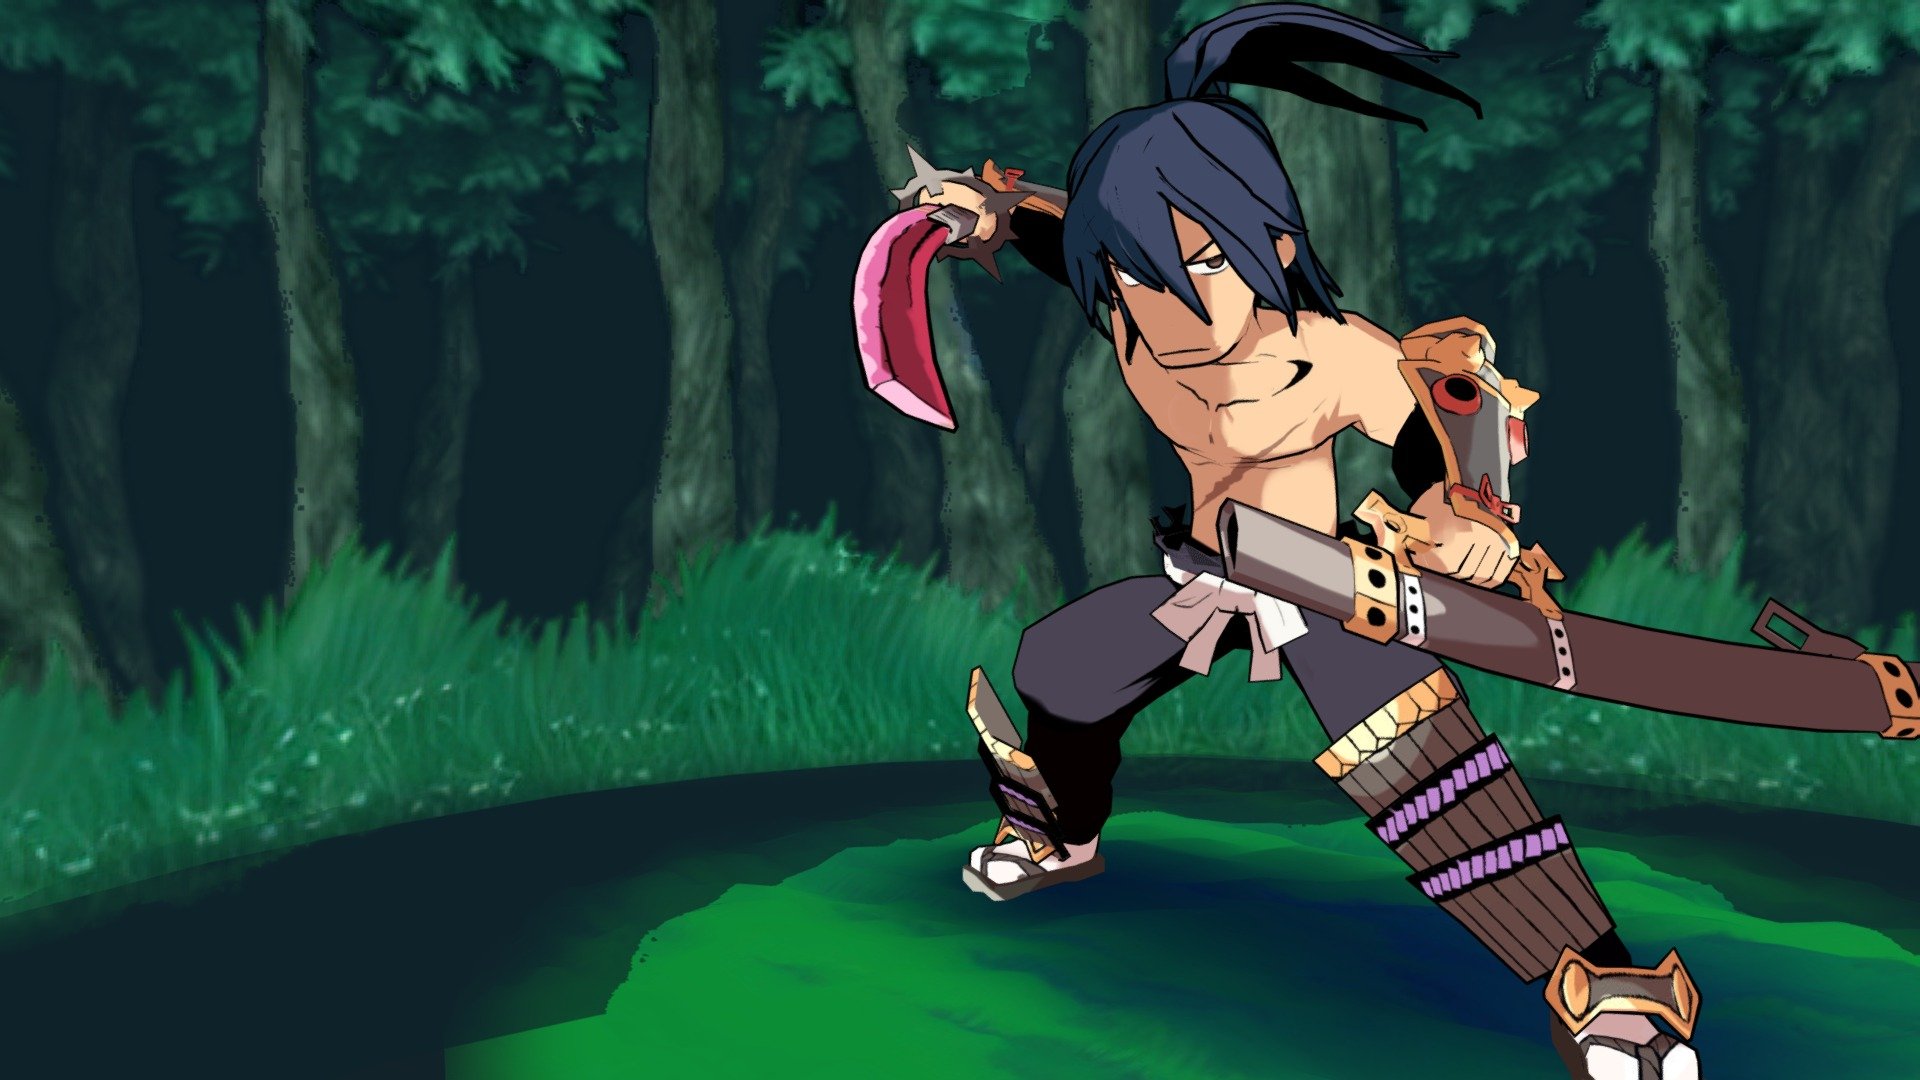 A 3D model of a Ronin class from the game Etrian odyssey

tried making another male character, 

The art this model is based off!



This character head is a bit off, I must say, 
I did tried my best to try making it's as close as the art as possible but, I sort of gave up half way through.'

The model looks pretty good, If you ignore the atrocious UV I had because I'm too lazy to unwrap it properly.

Speed modelling video : https://youtu.be/d-rqtlU-T7A - [Etrian odyssey] Ronin - 3D model by Chavafei 3d model